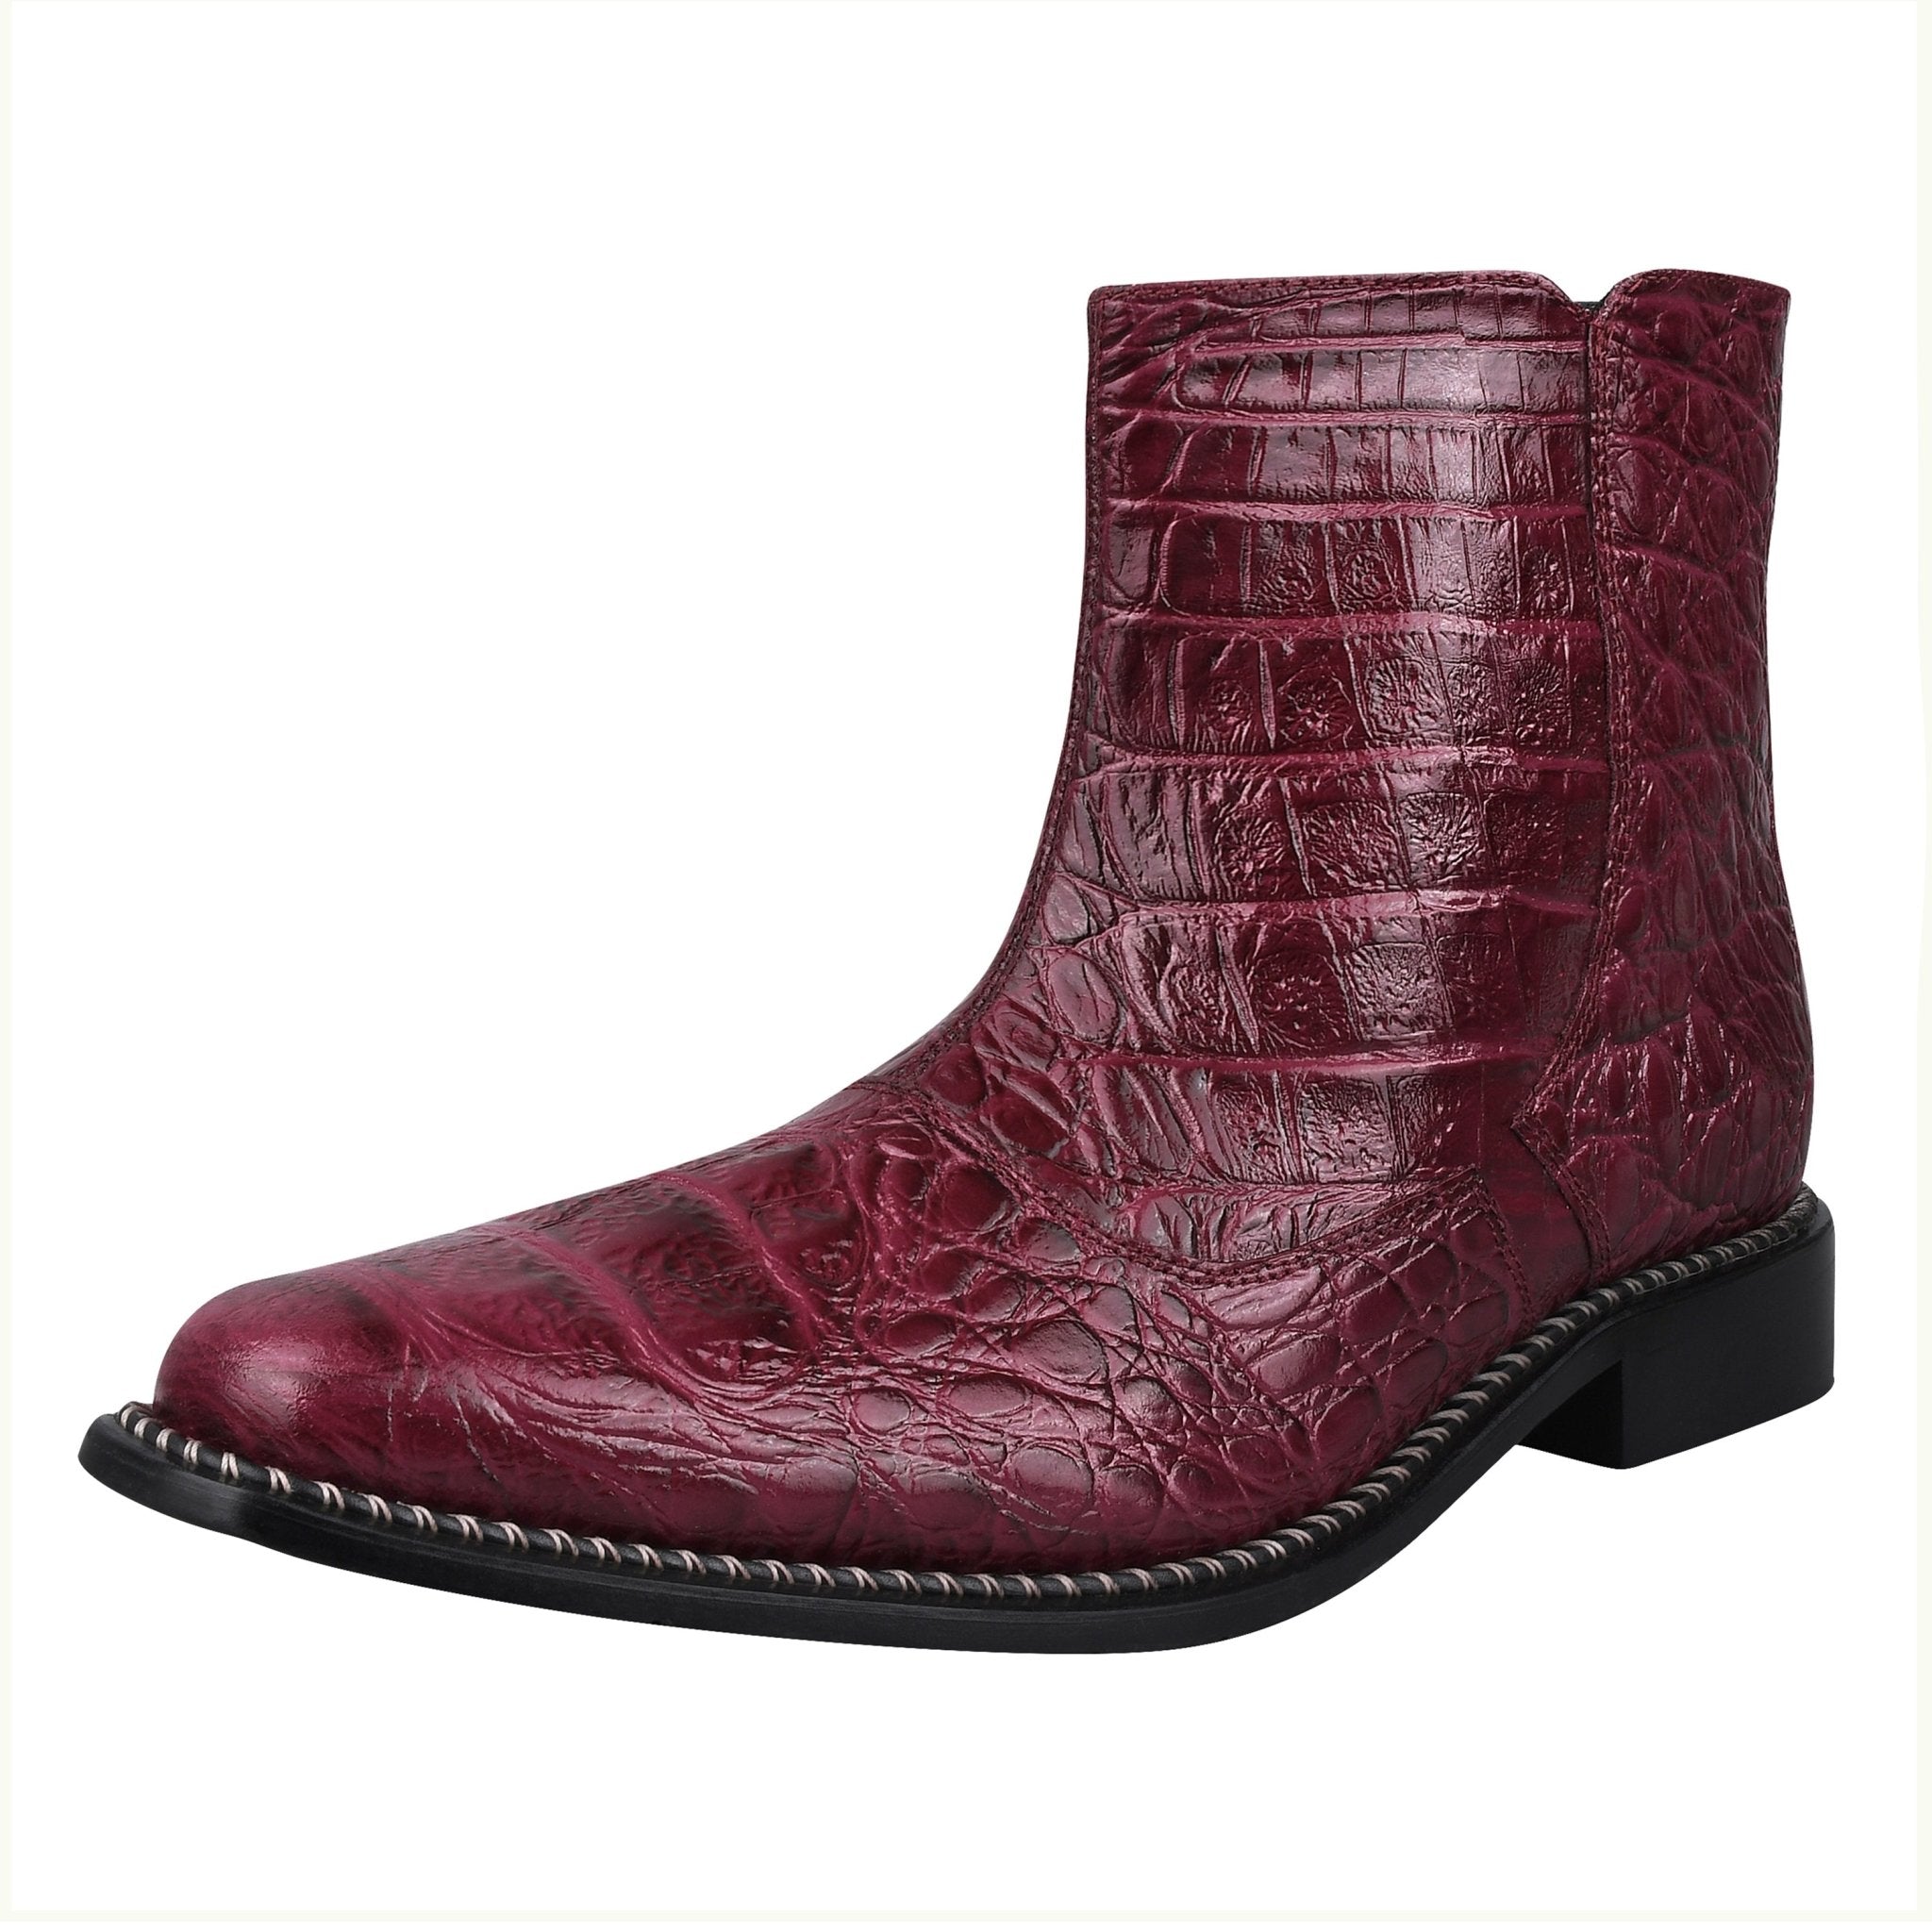 SANDRA Leather Ankle Length Side Zip Up Boots